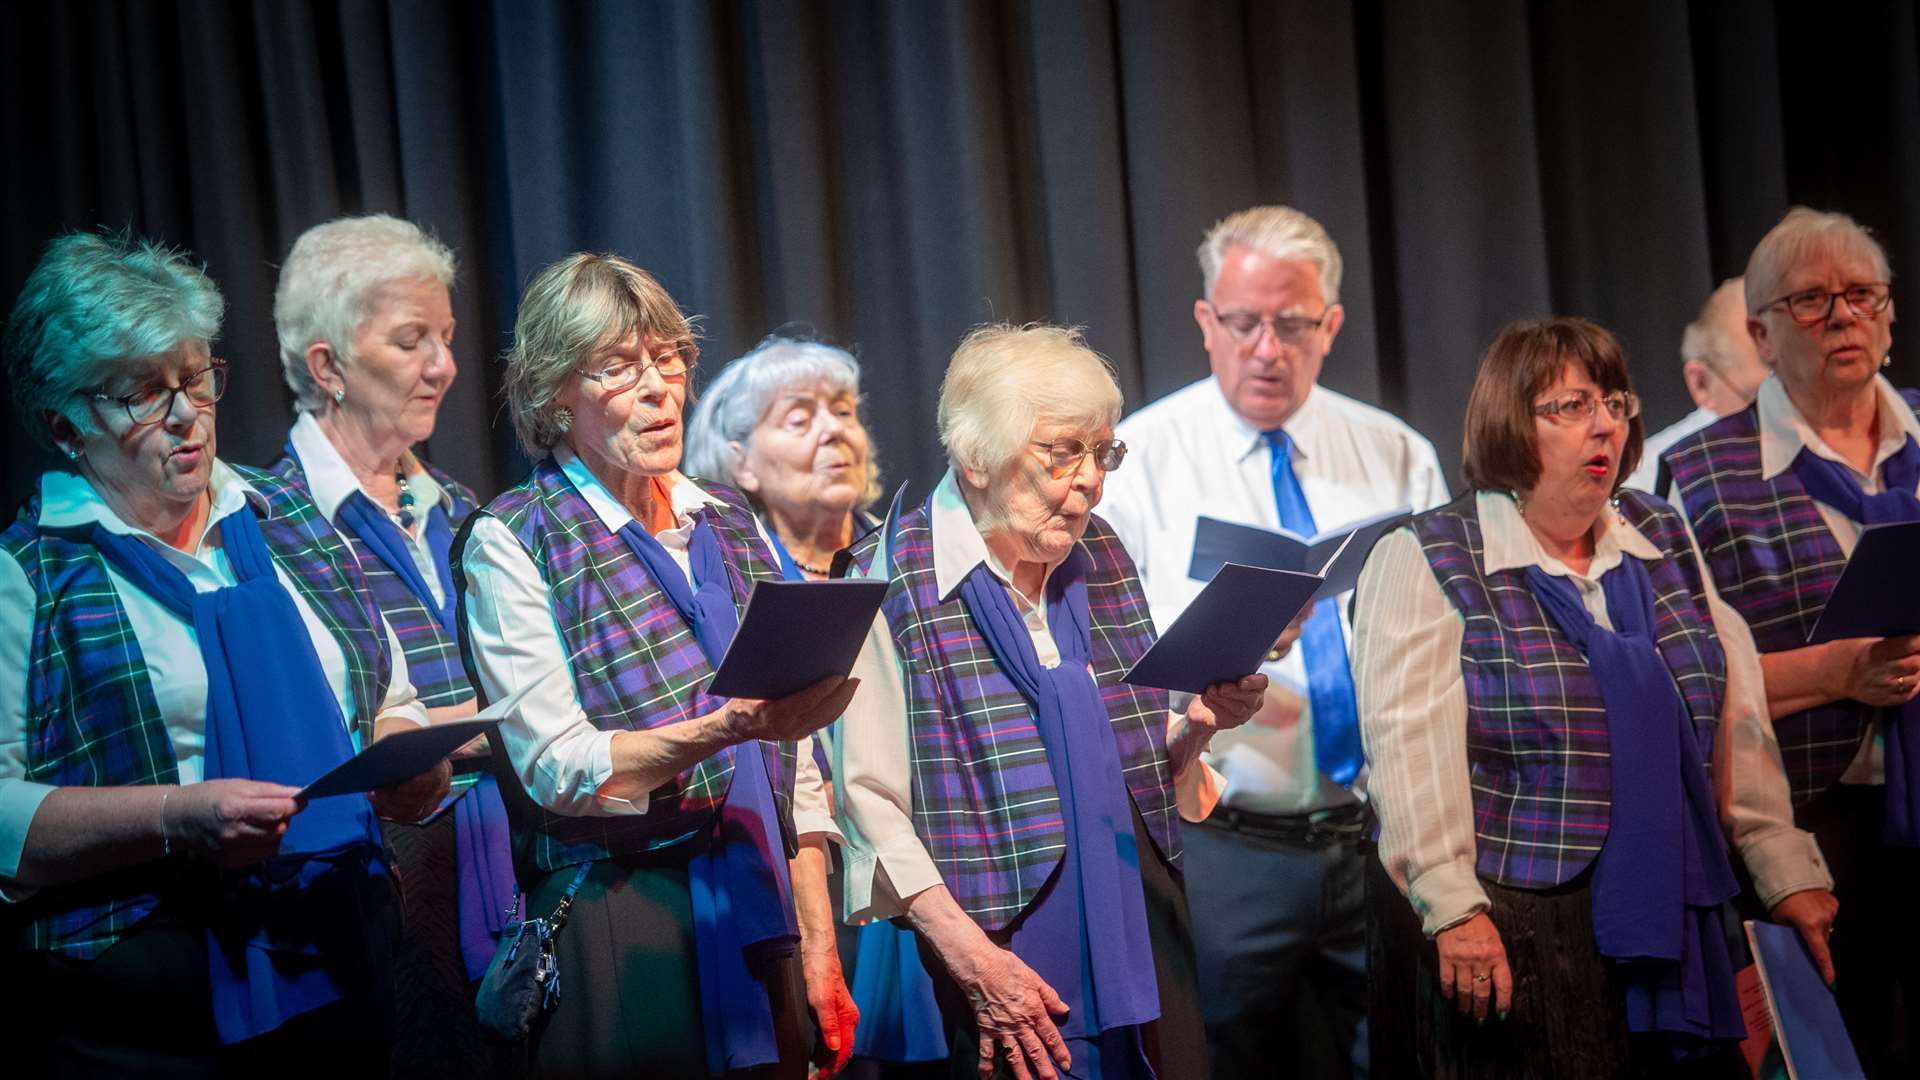 Singing for Pleasure is among the groups which meet at Merkinch Community Centre in Inverness. Pictures: Callum Mackay